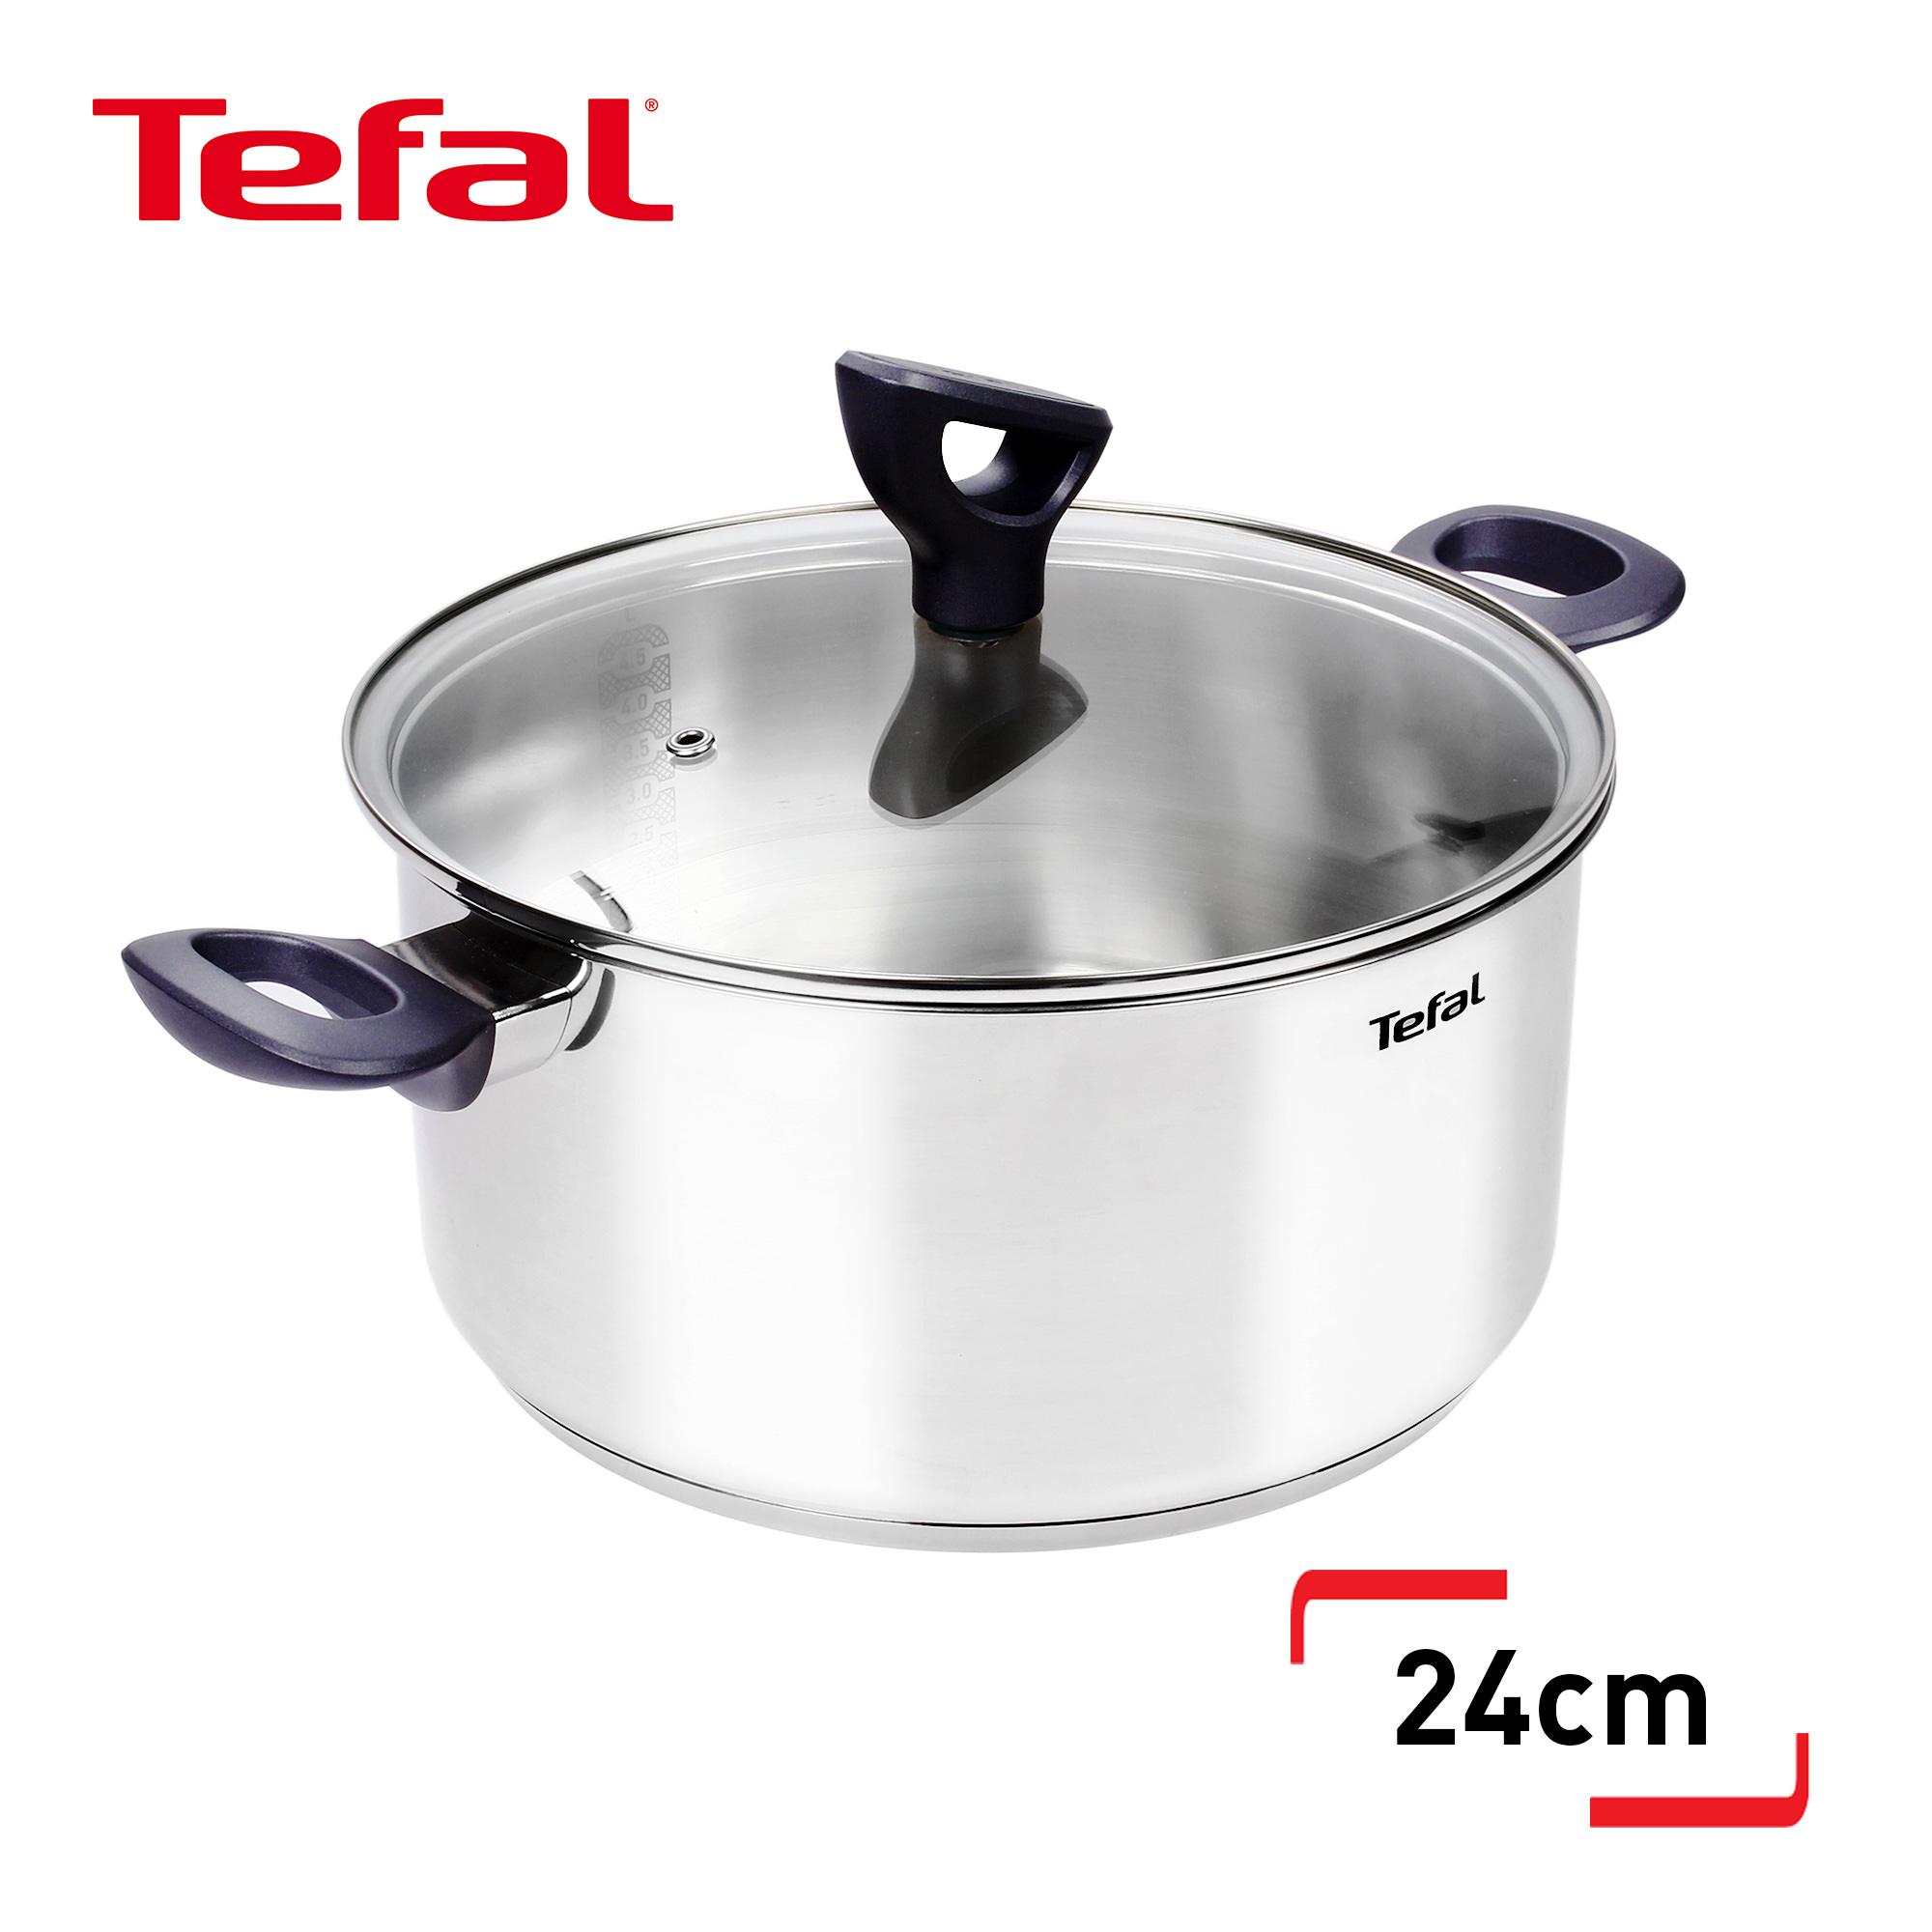 Tefal Daily Cook Stewpot 24cm w/ Lid